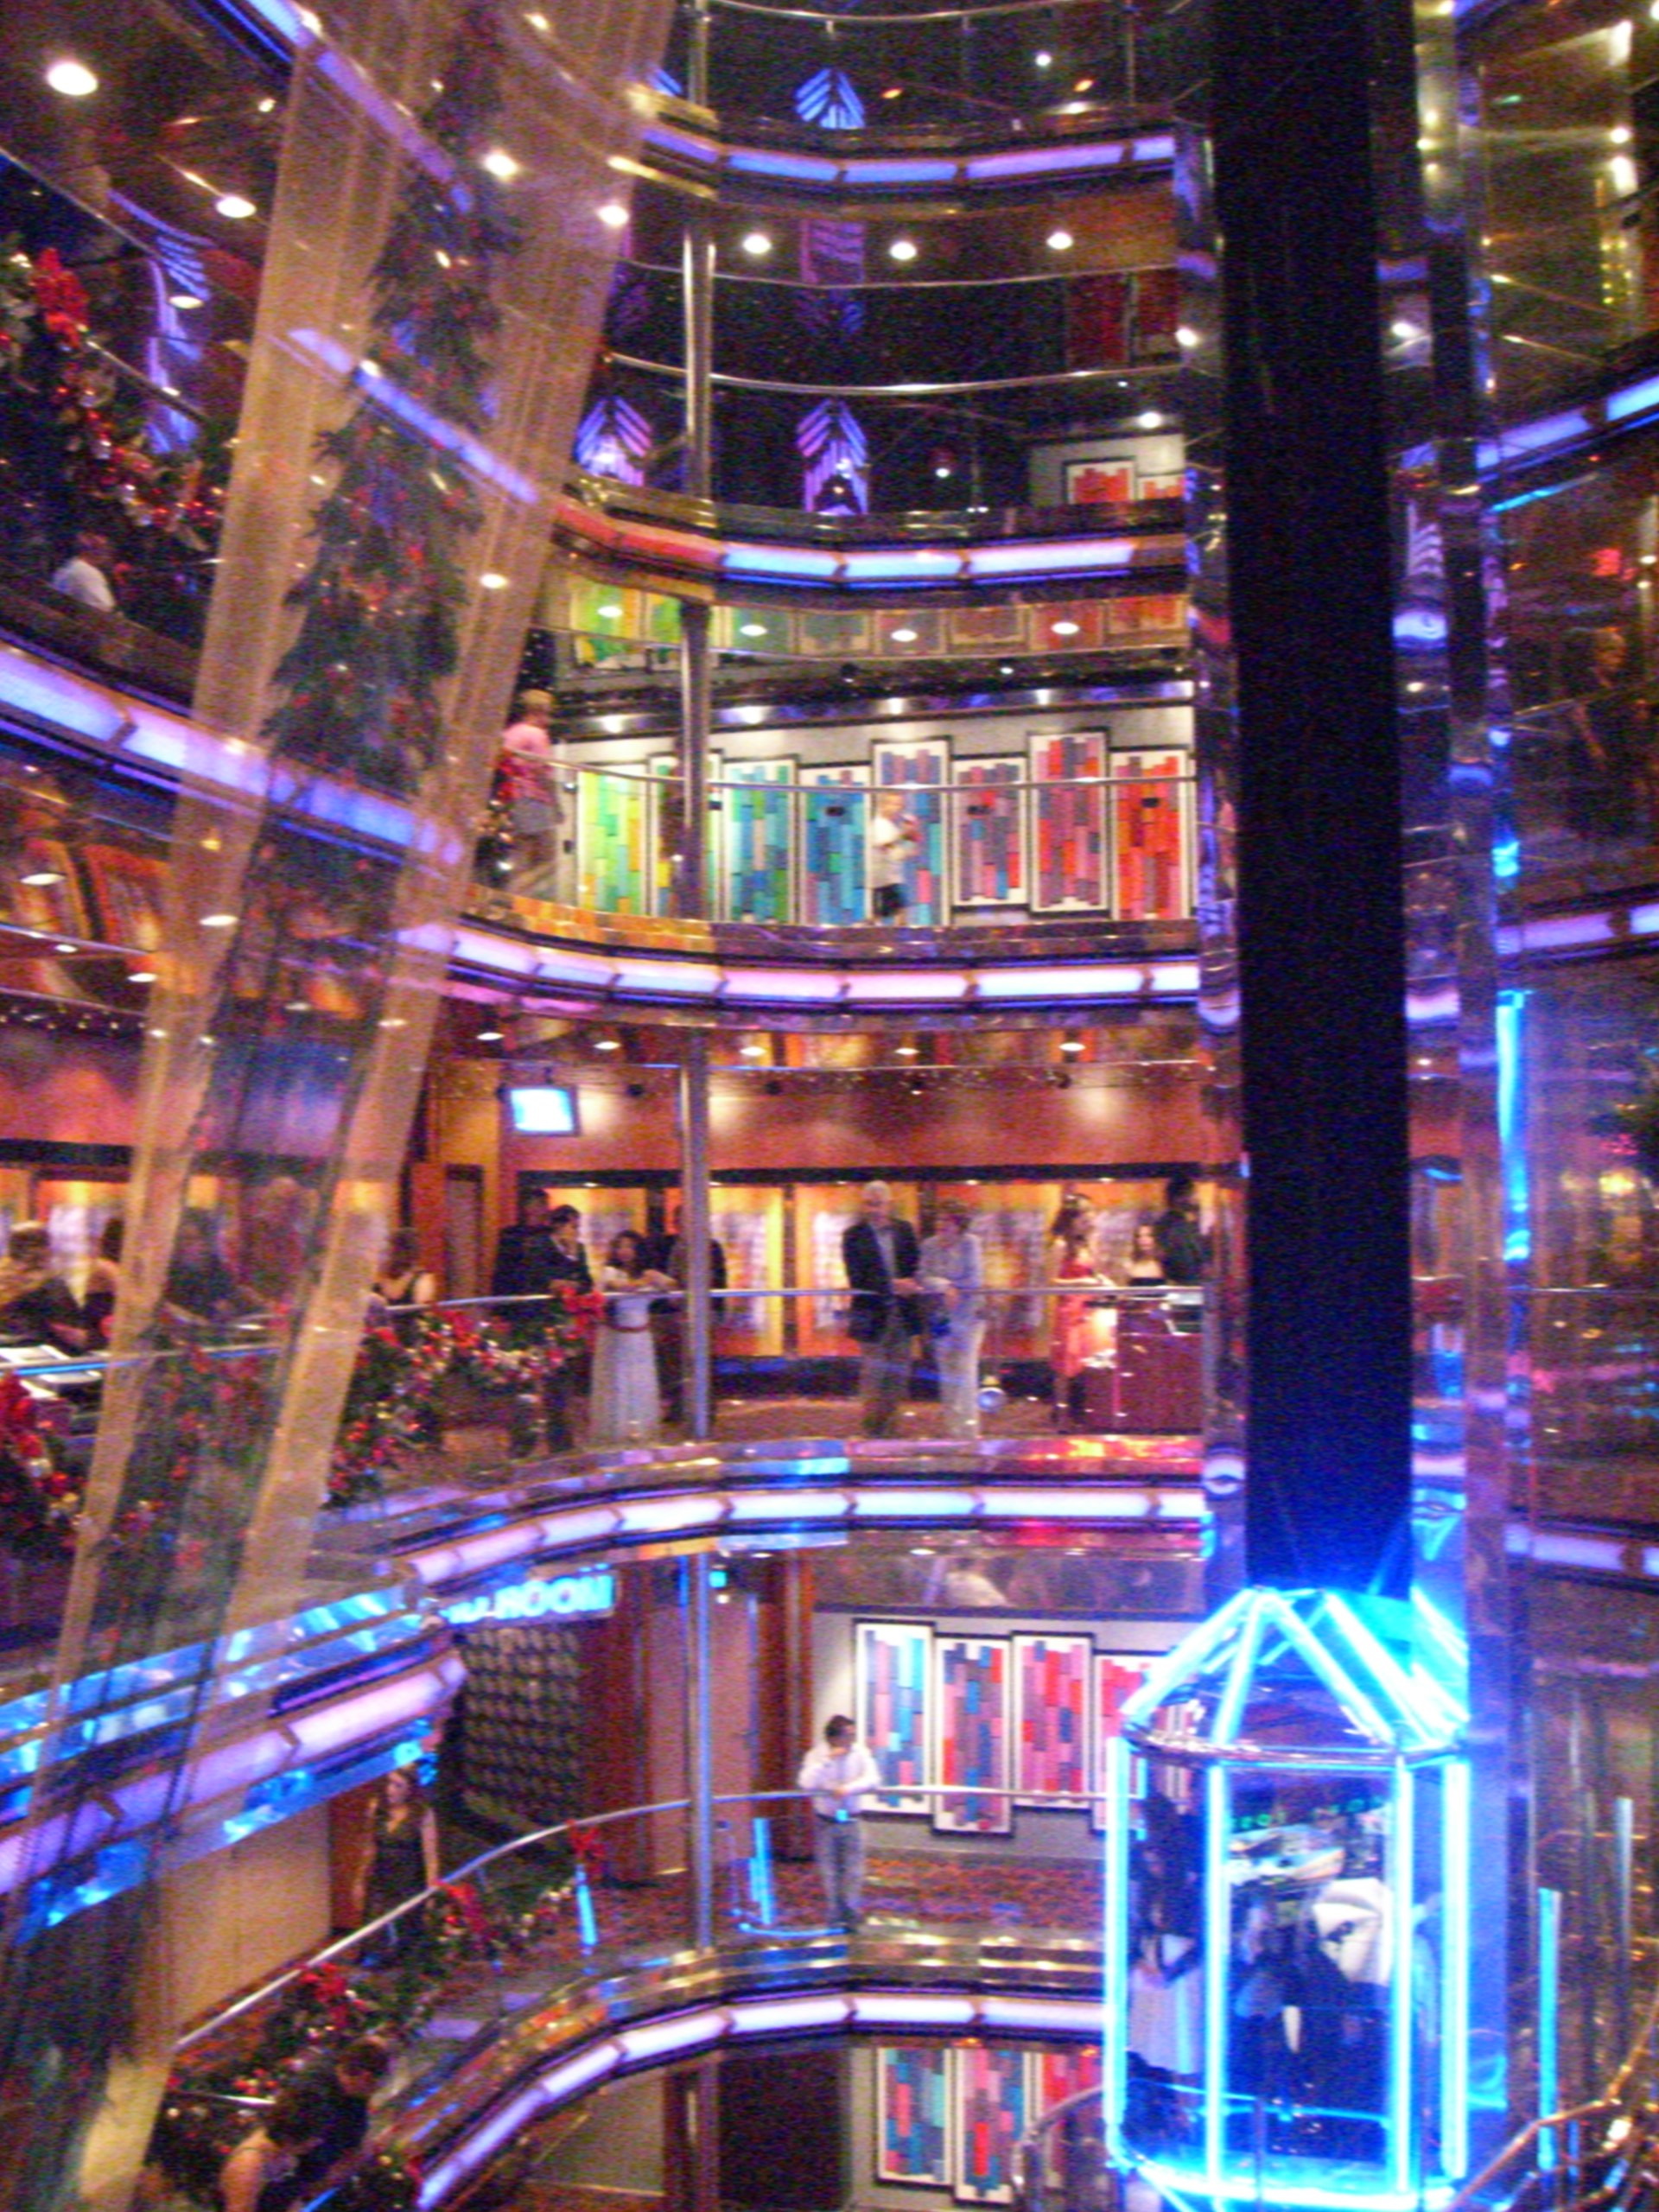 The atrium and elevators of Carnival Ecstasy, our cruise ship, November 2007